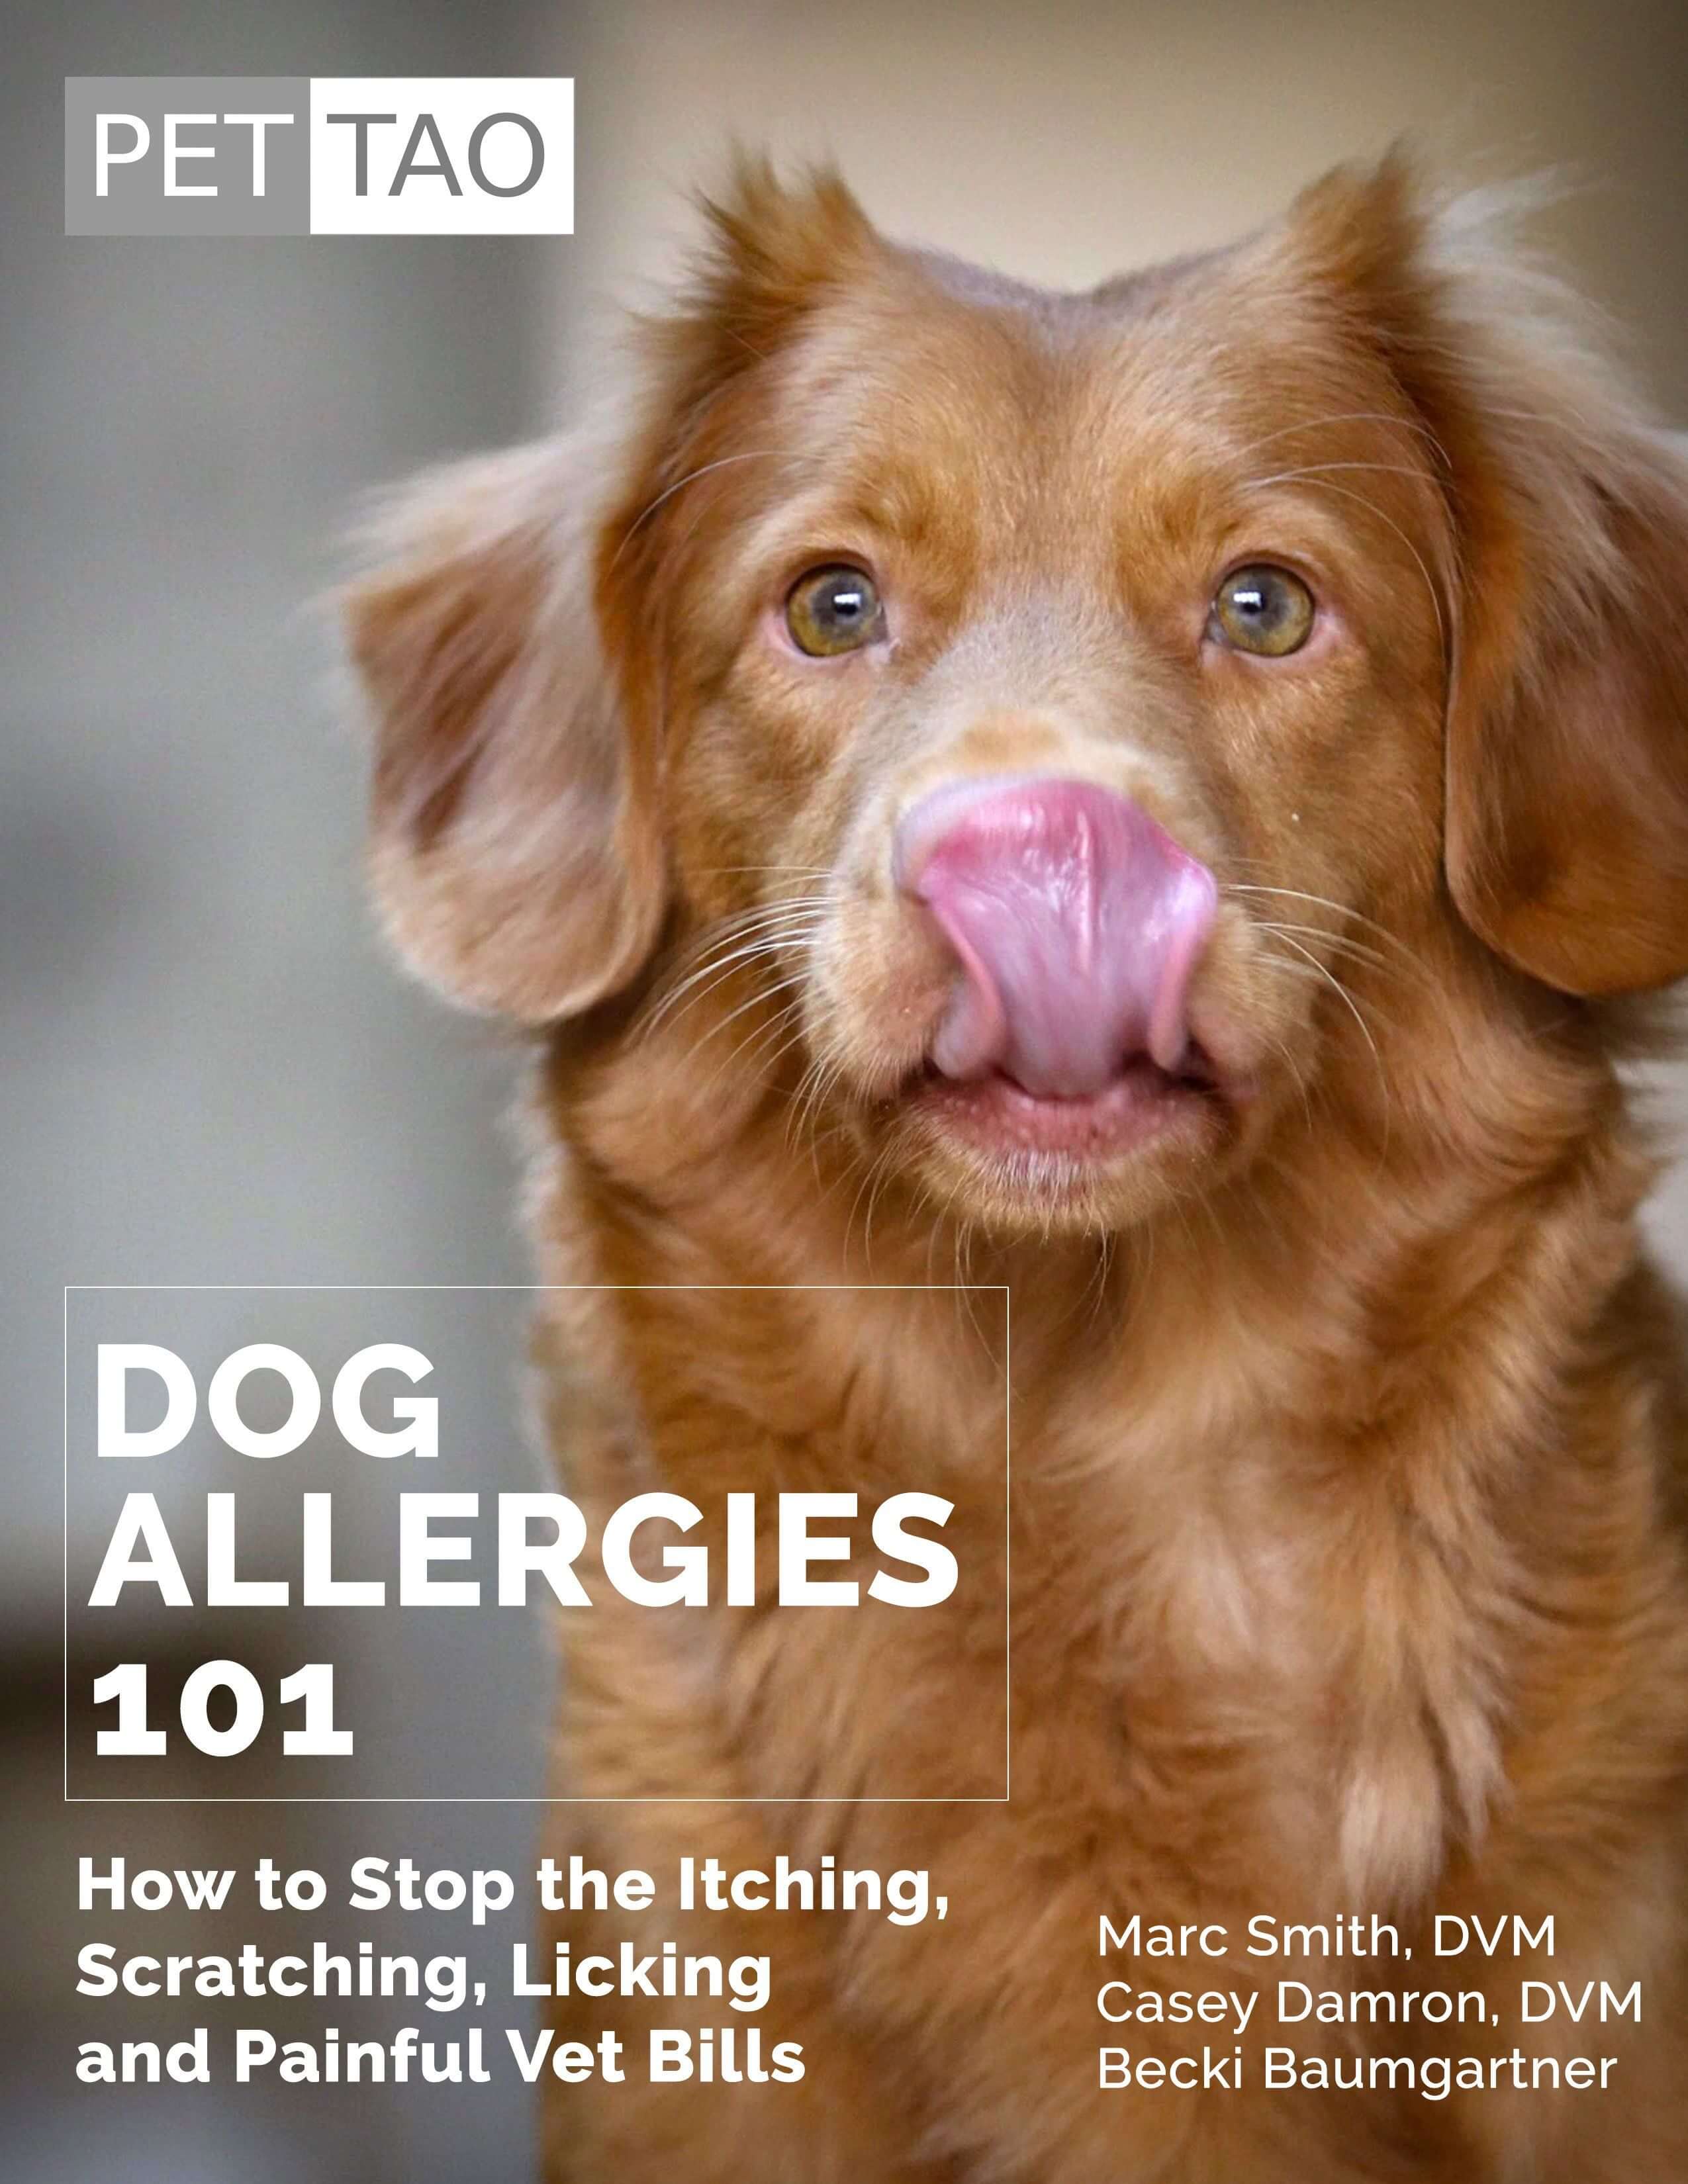 Dog Allergies 101: How to Stop the Itching, Scratching, Licking & Painful Vet Bills - Instant Ebook Download  - TCVM Pet Supply